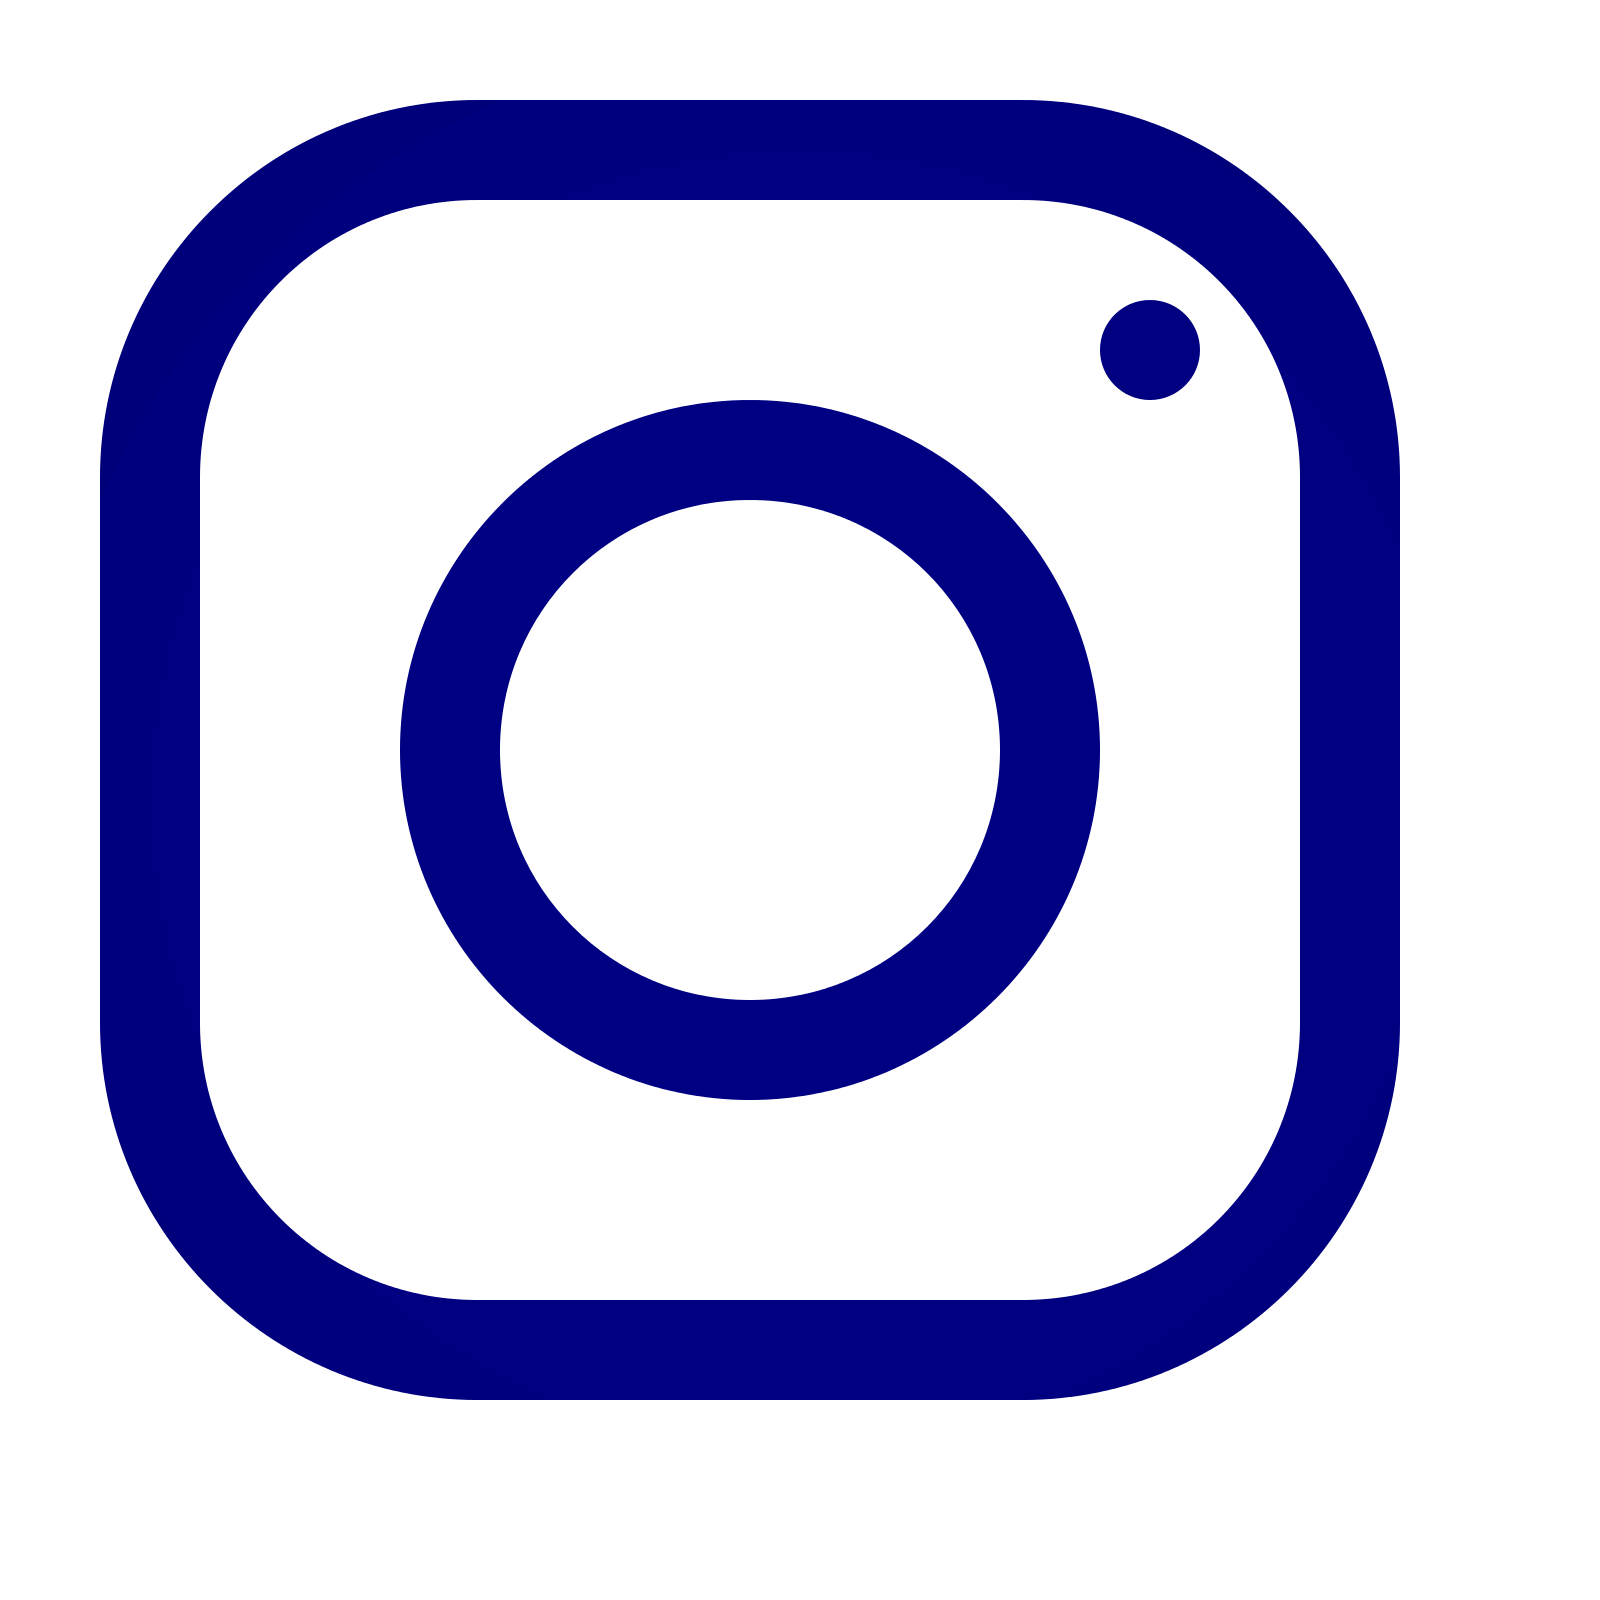 How to Check Blue on Instagram, Easy!